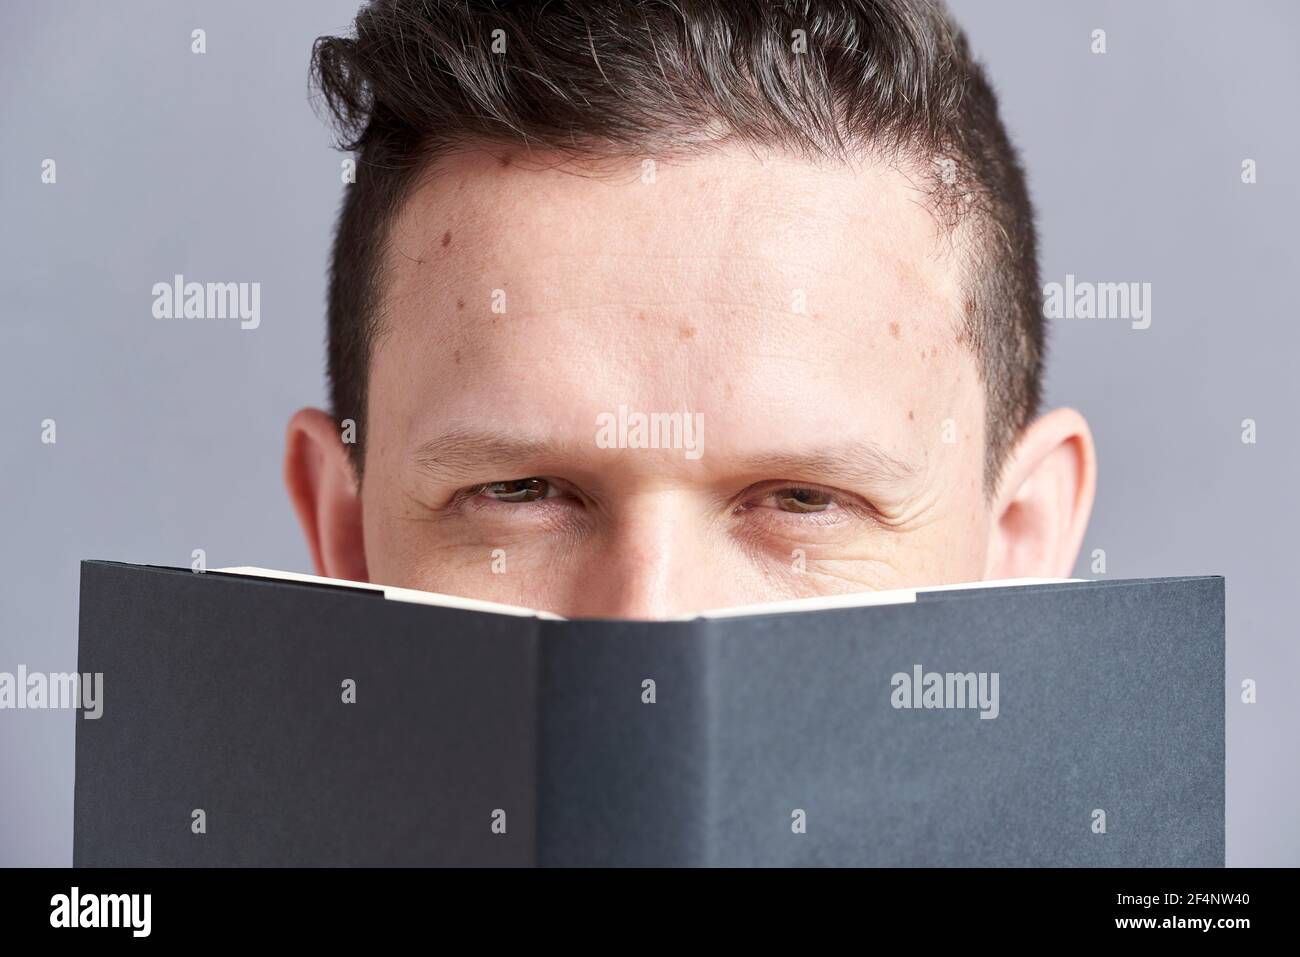 Young man looking intensely, askance, at the camera, peeking out from behind an open black book. Frontal portrait with gray background. Stock Photo